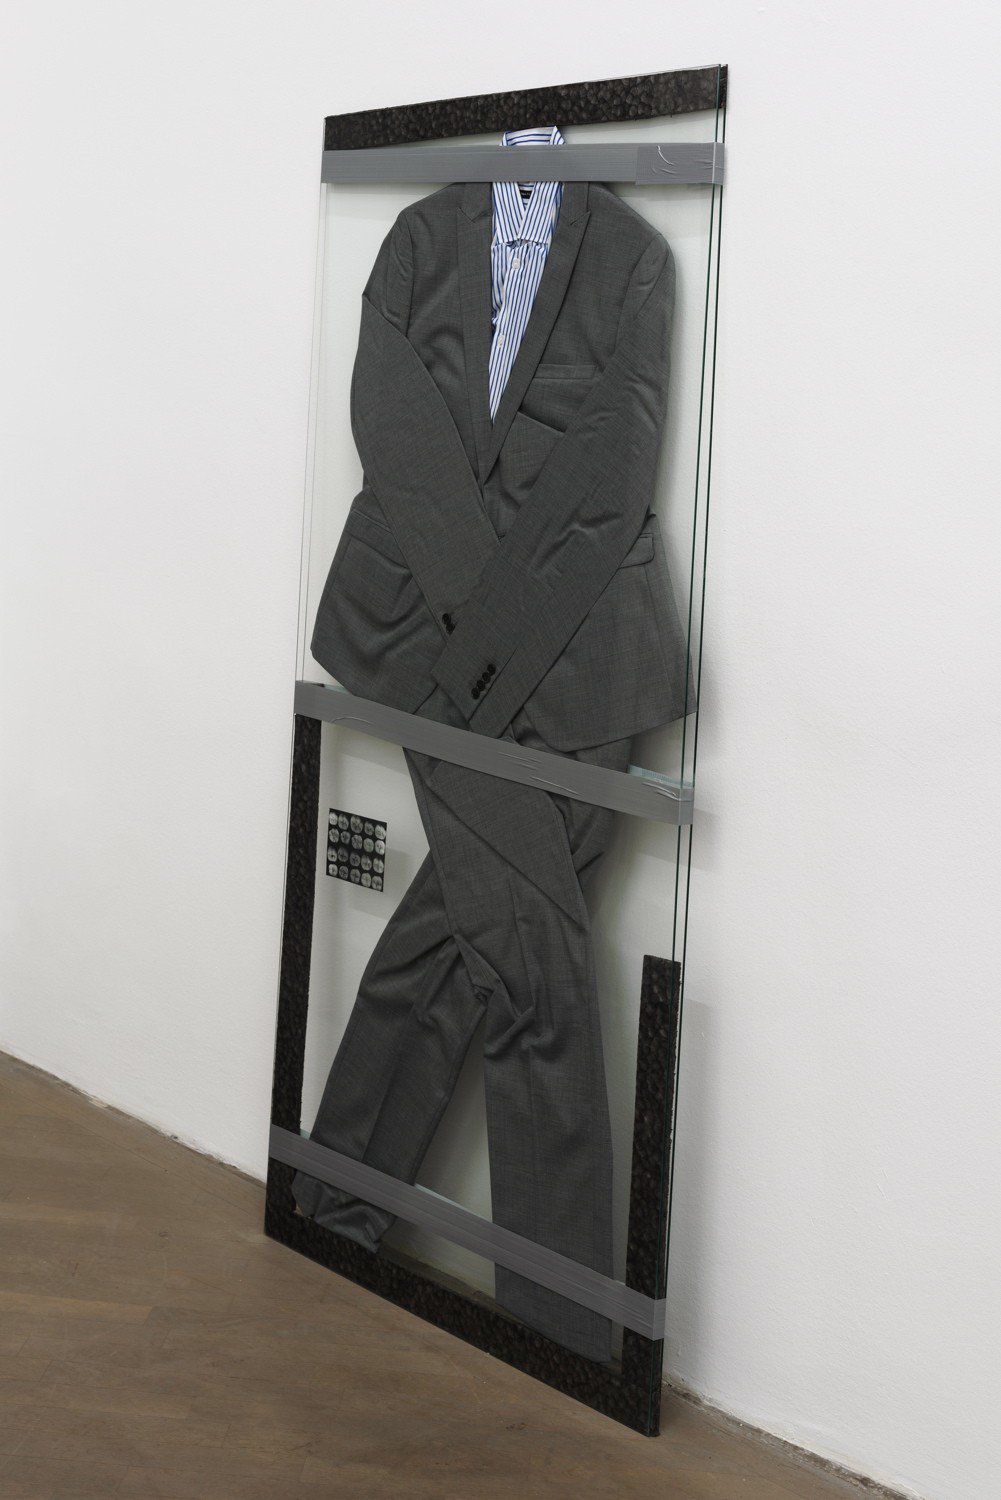 Lili Reynaud-DewarLive Through That?!Suit, shirt, foam, cut out photograph, duct tape and glass165 x 75 x 2.5 cm